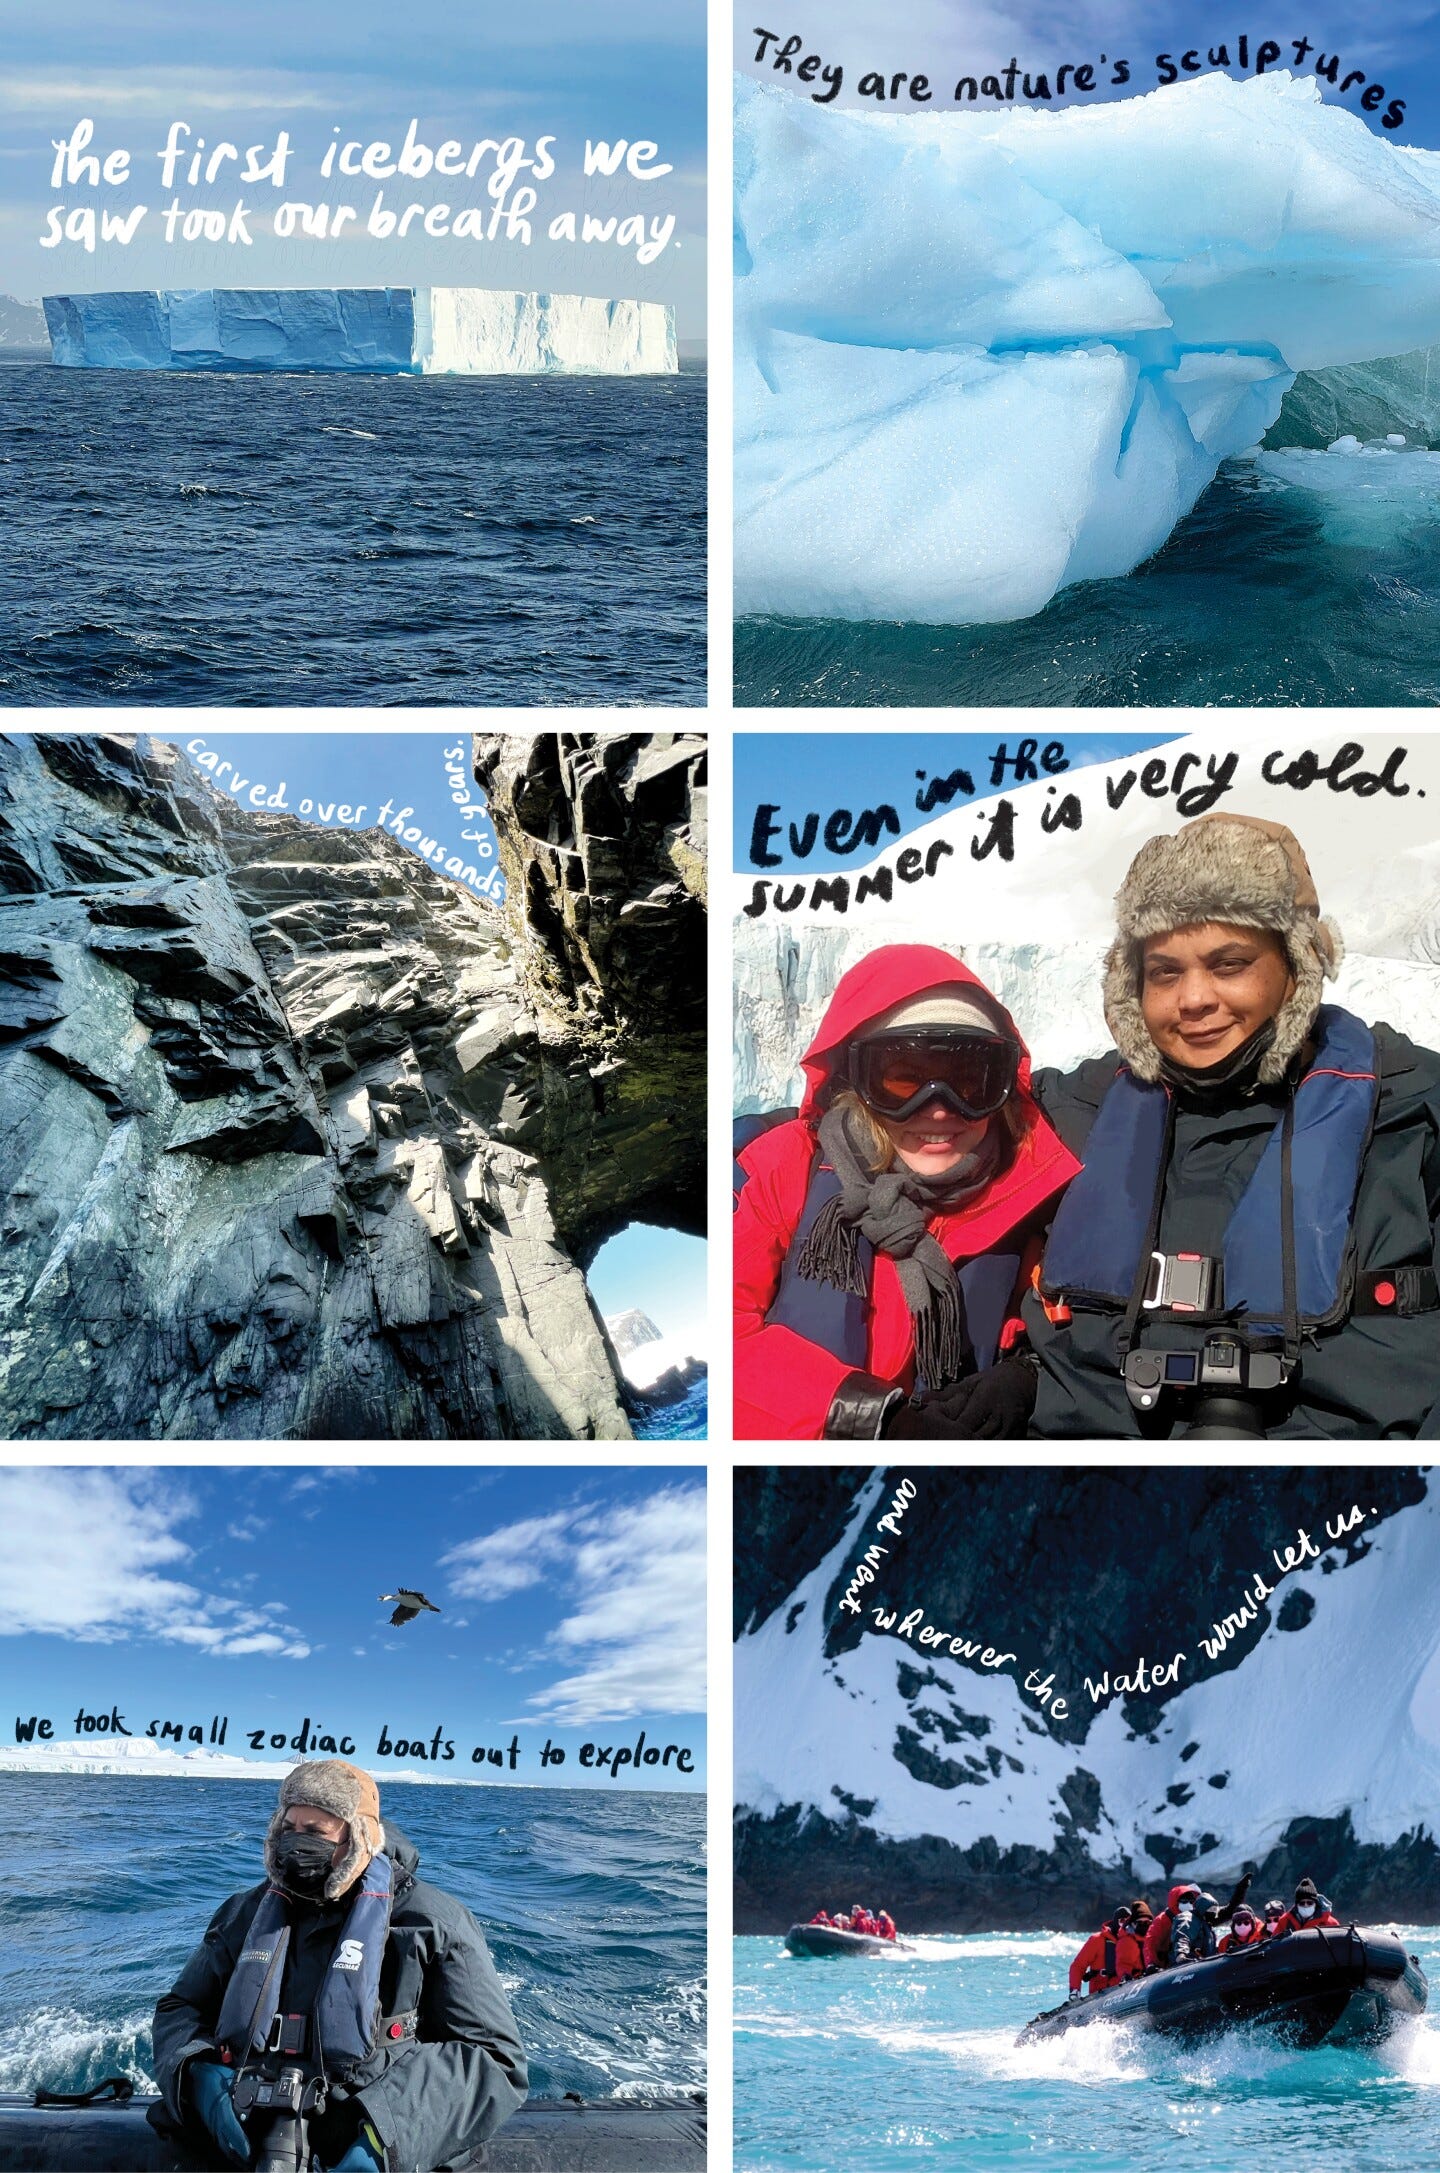 Debbie Millman's collage of her and Roxane Gay's trip to Antartica